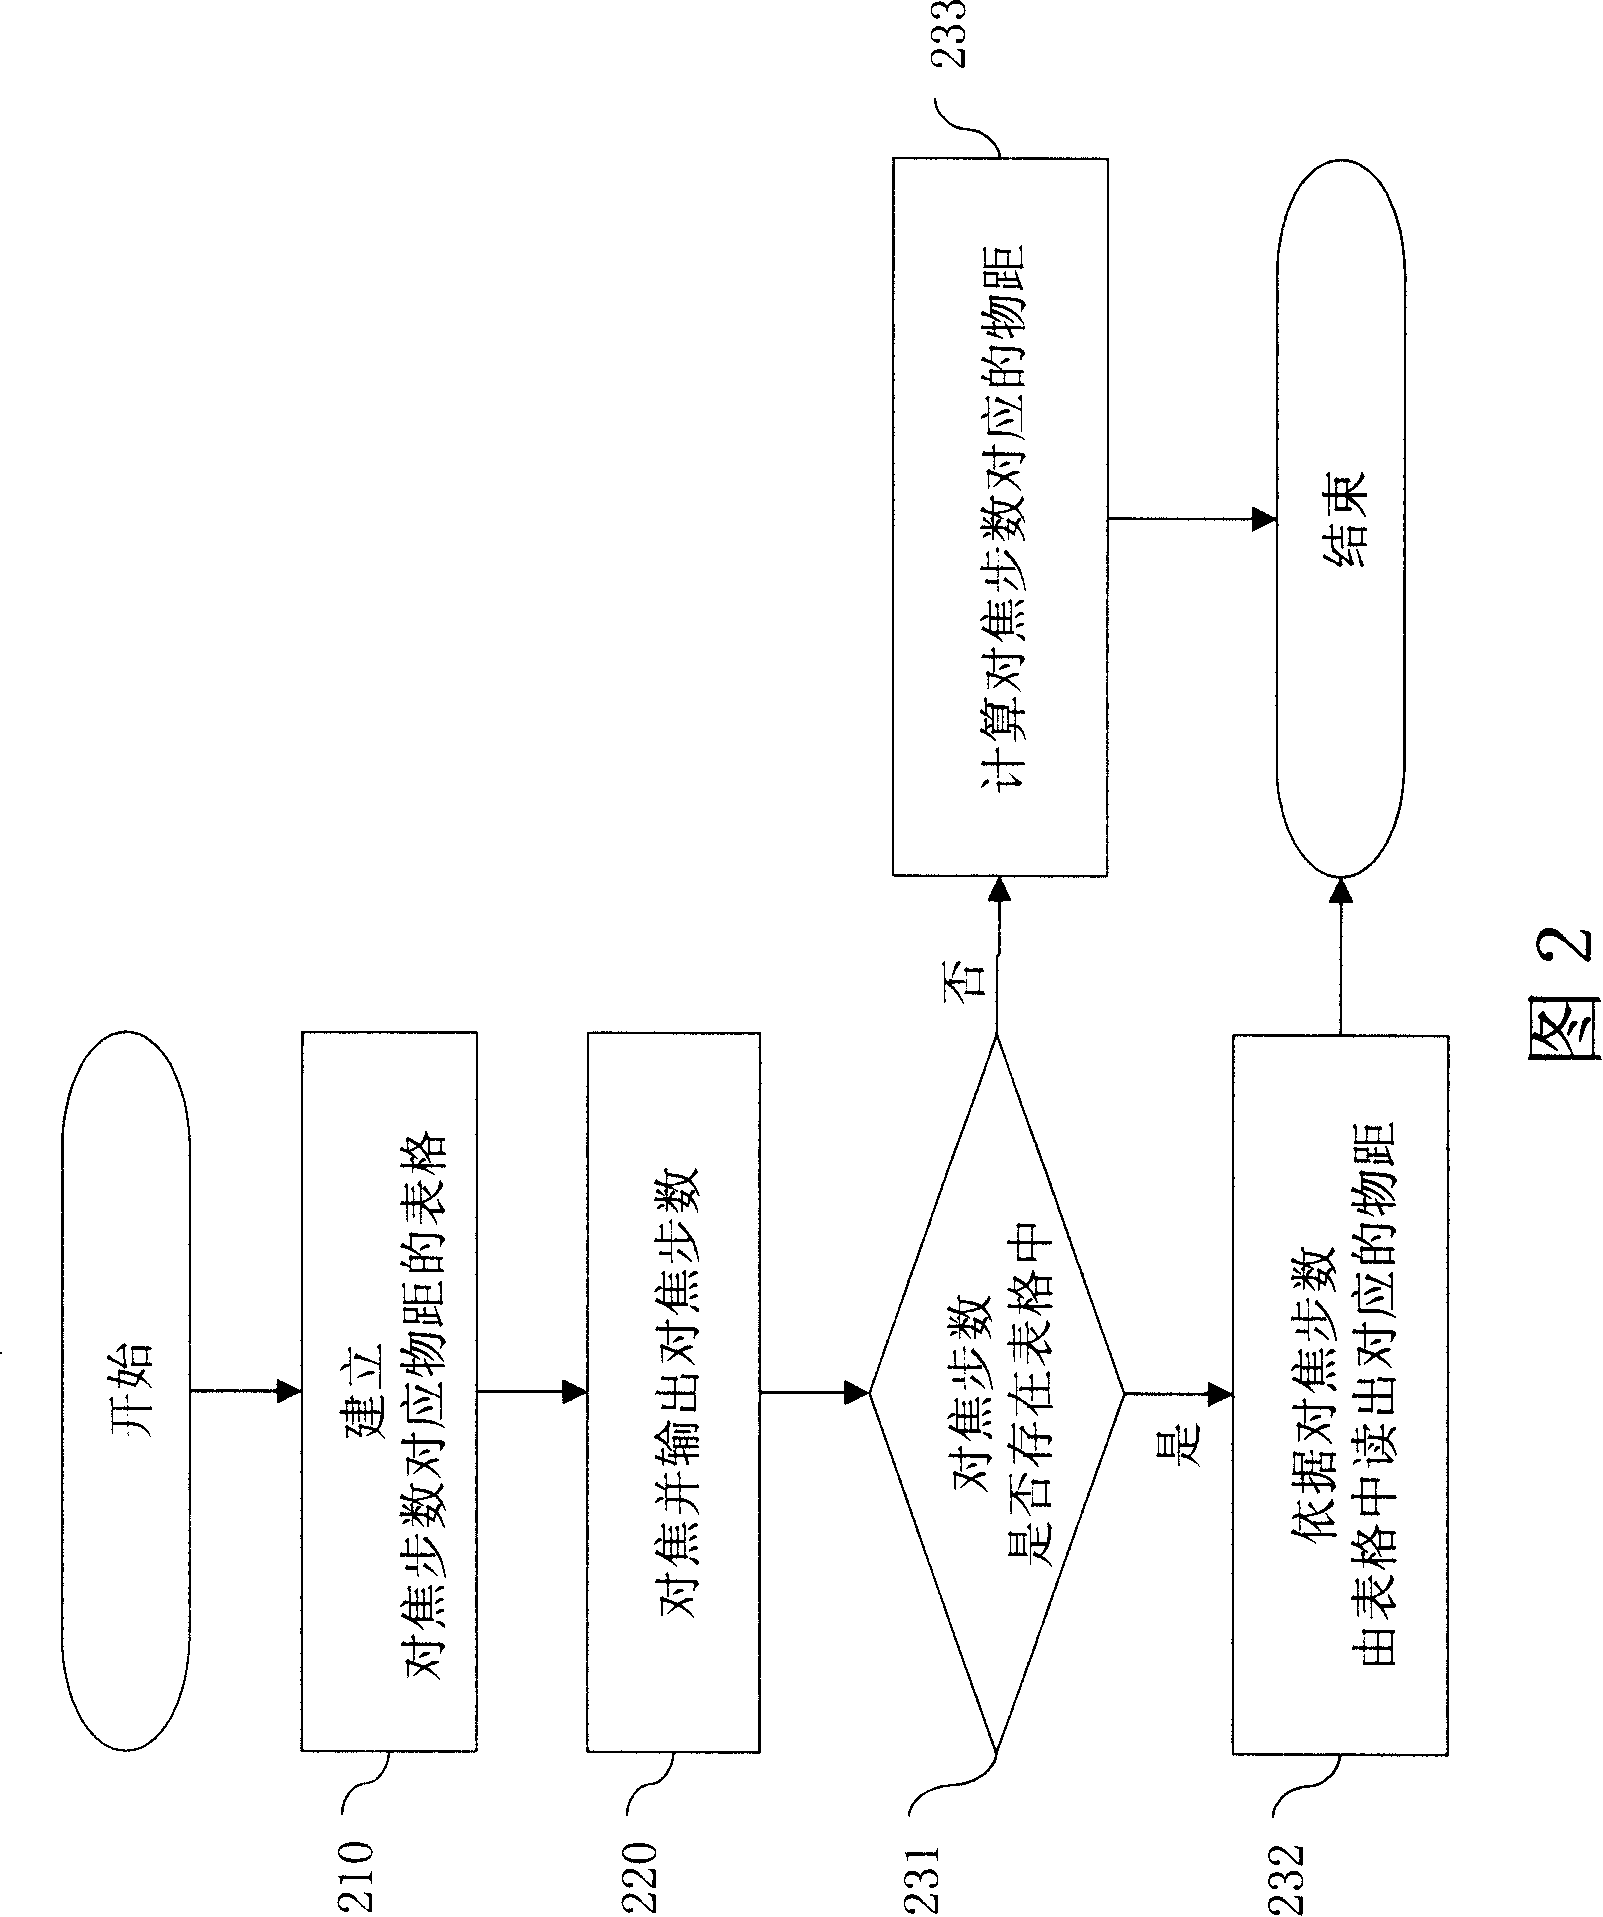 Method for calculating distance and actuate size of shot object